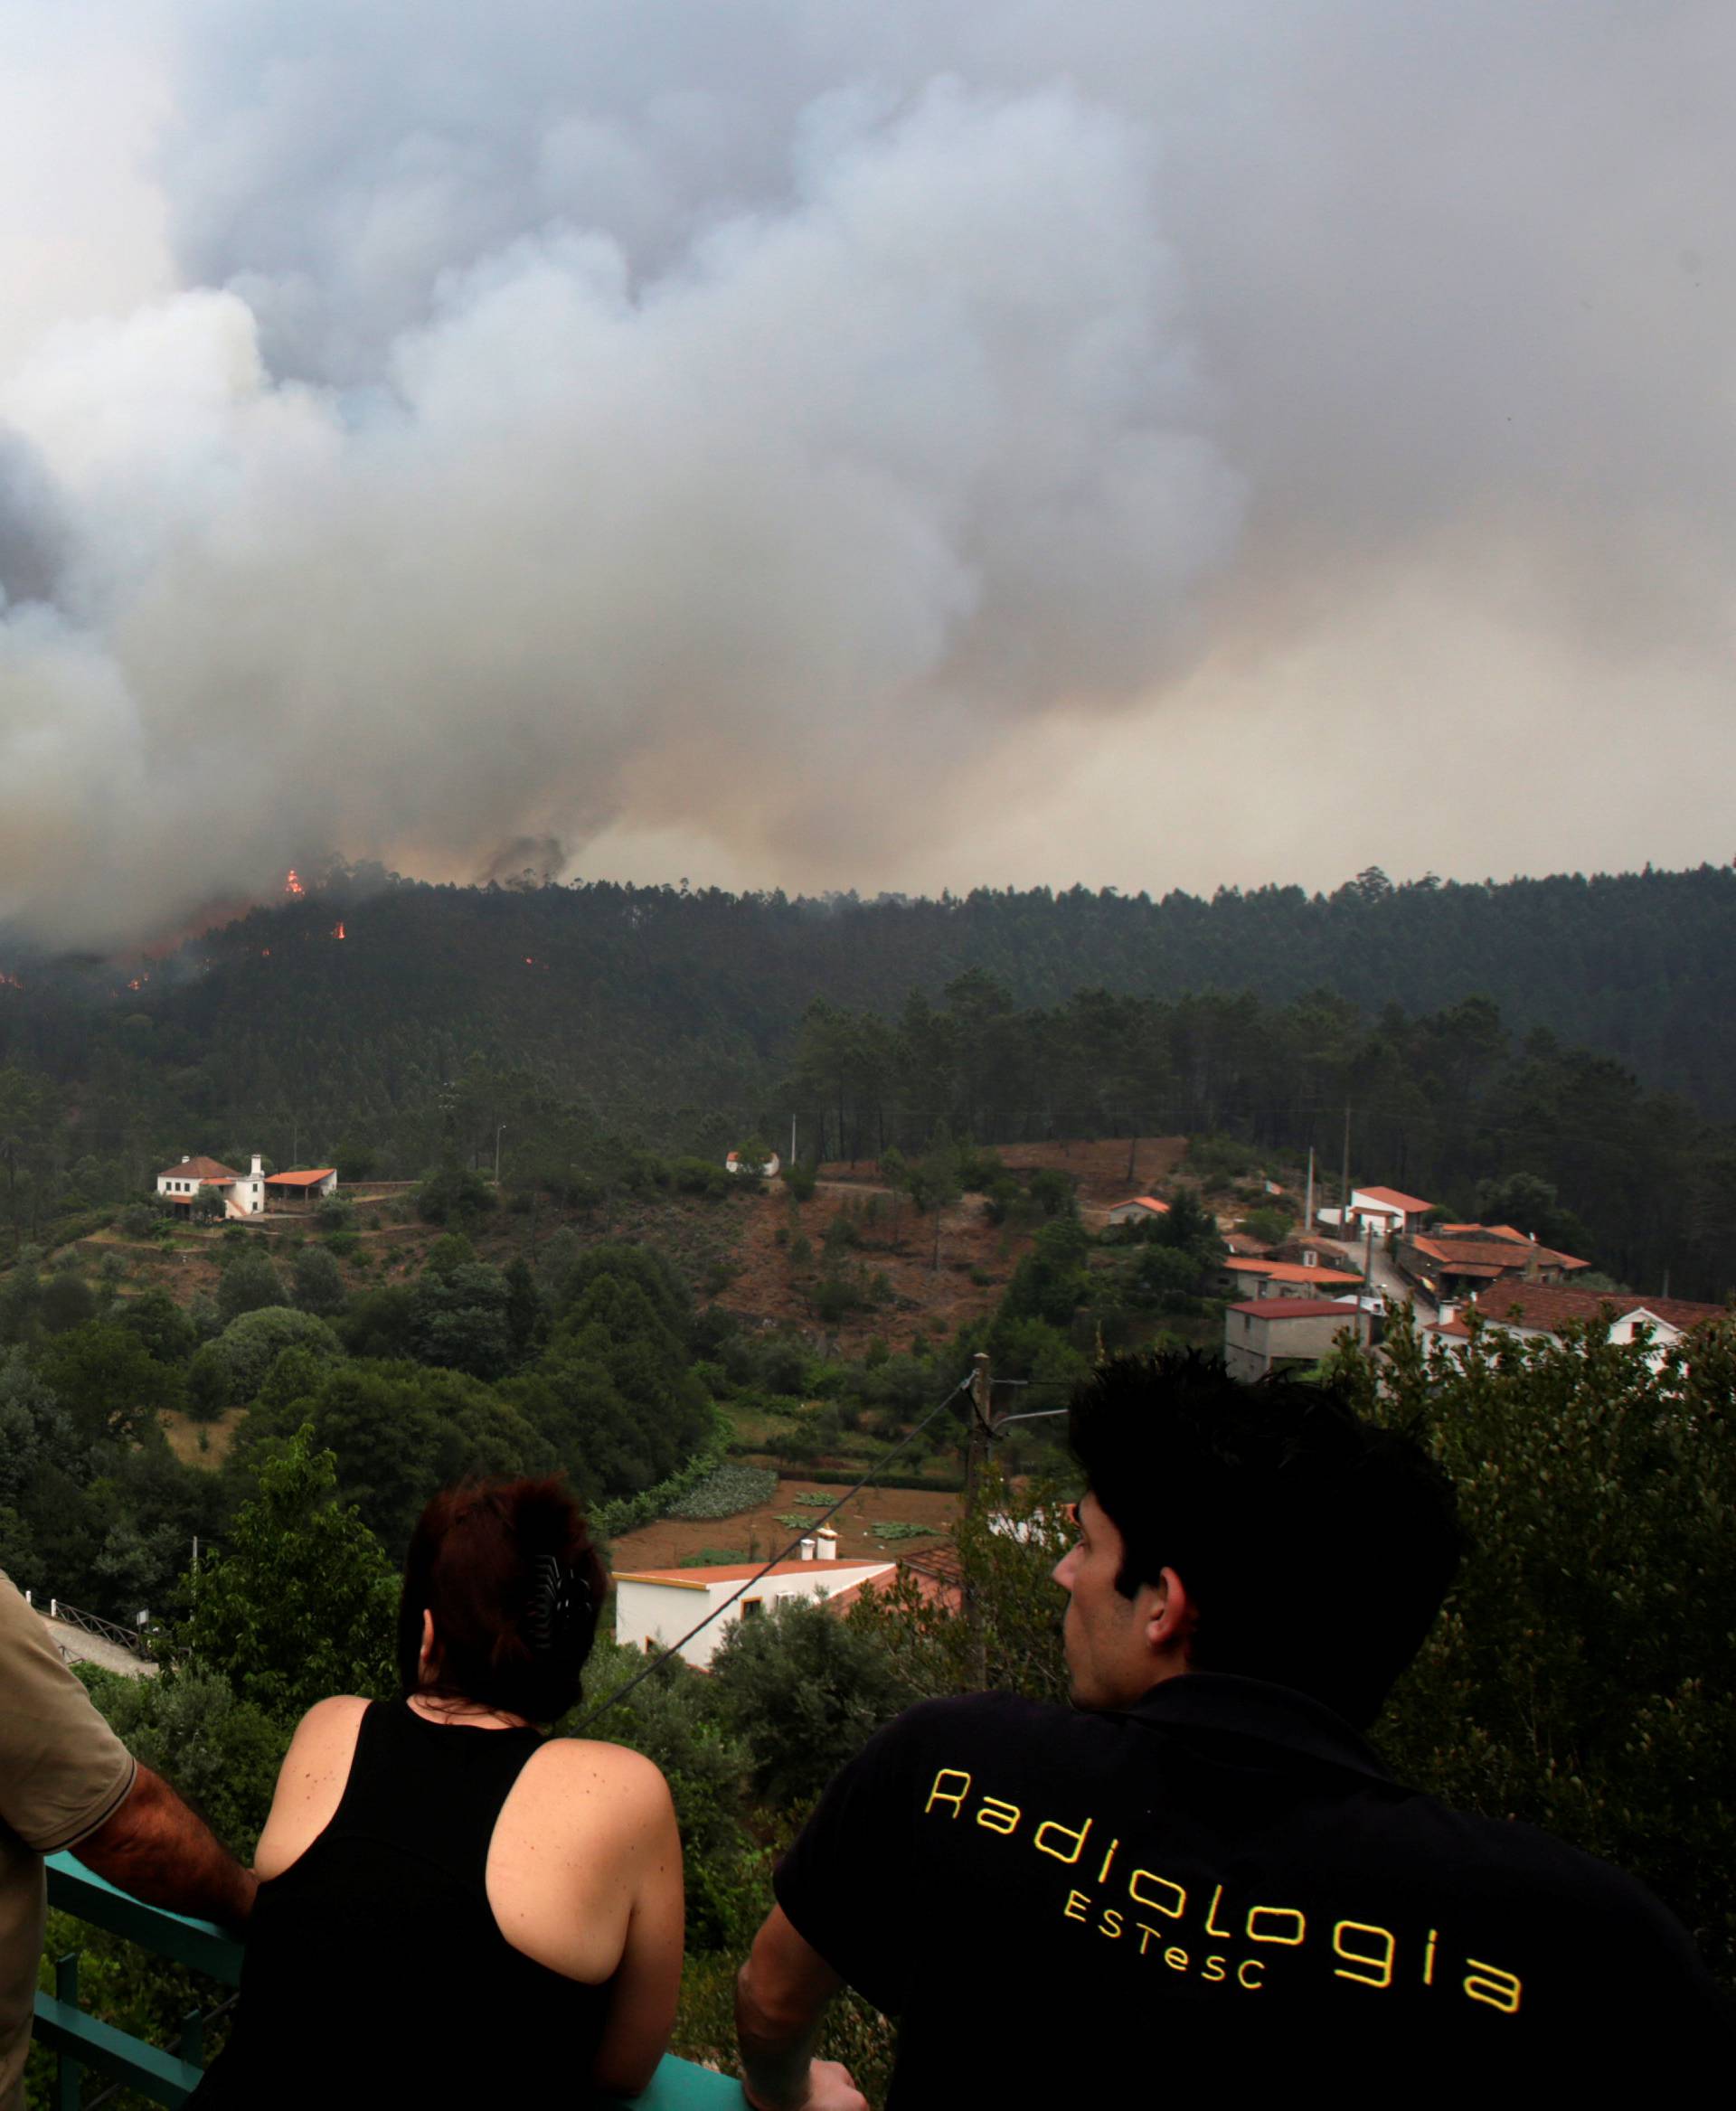 People look at fire and smoke during a forest fire in Pedrogao Grande